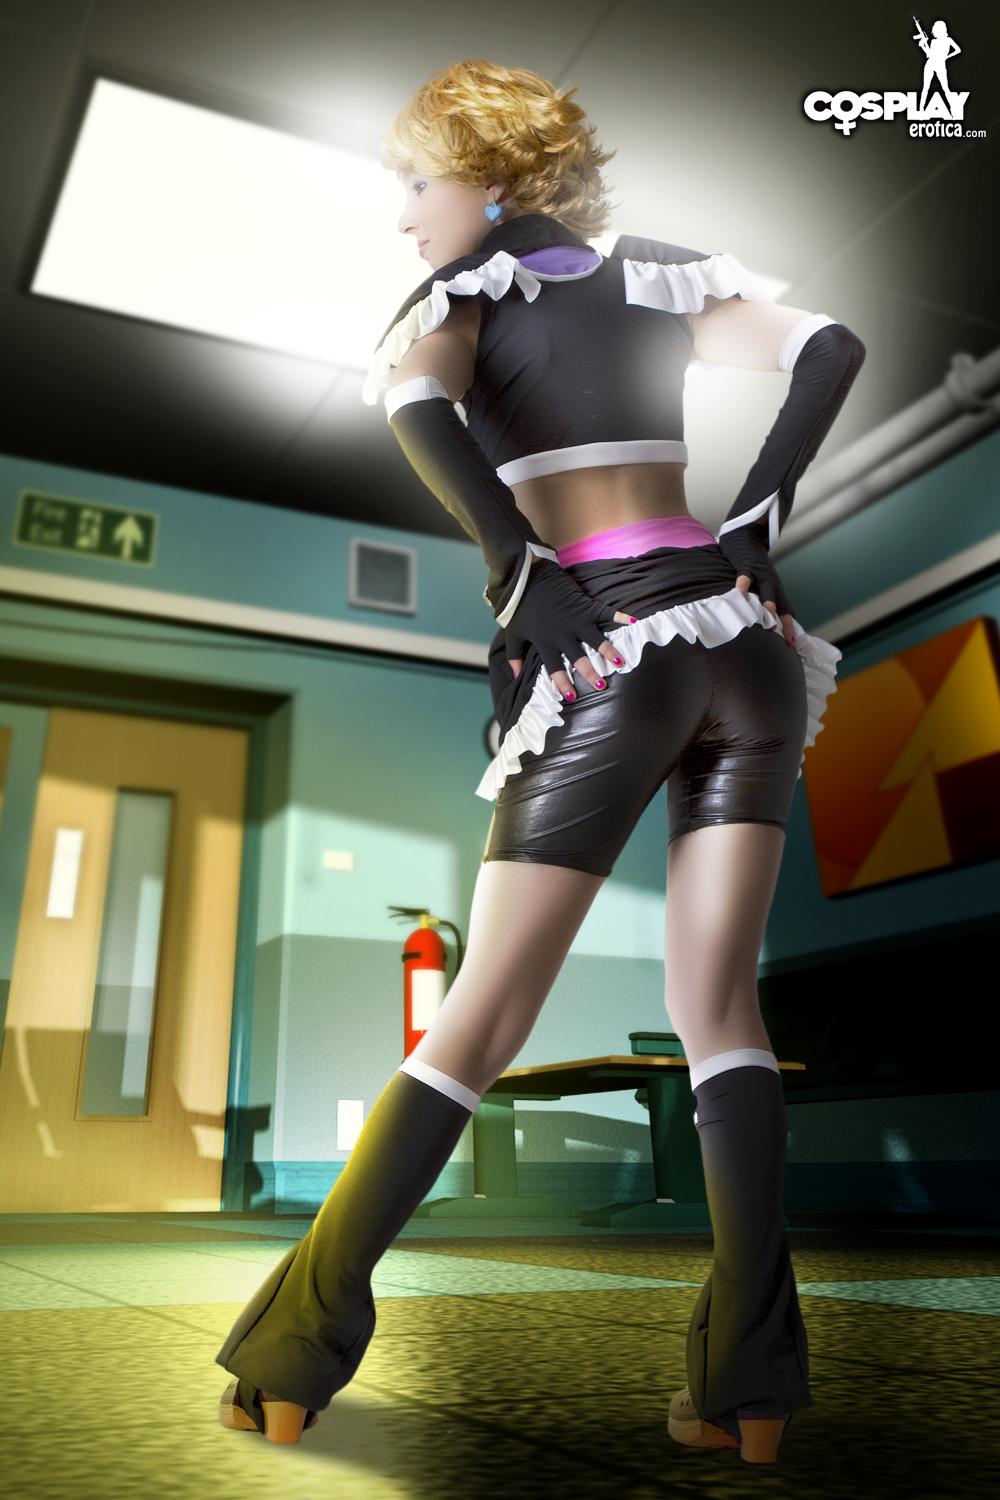 Cosplay hottie stacy strisce in un set anime sexy
 #60007685